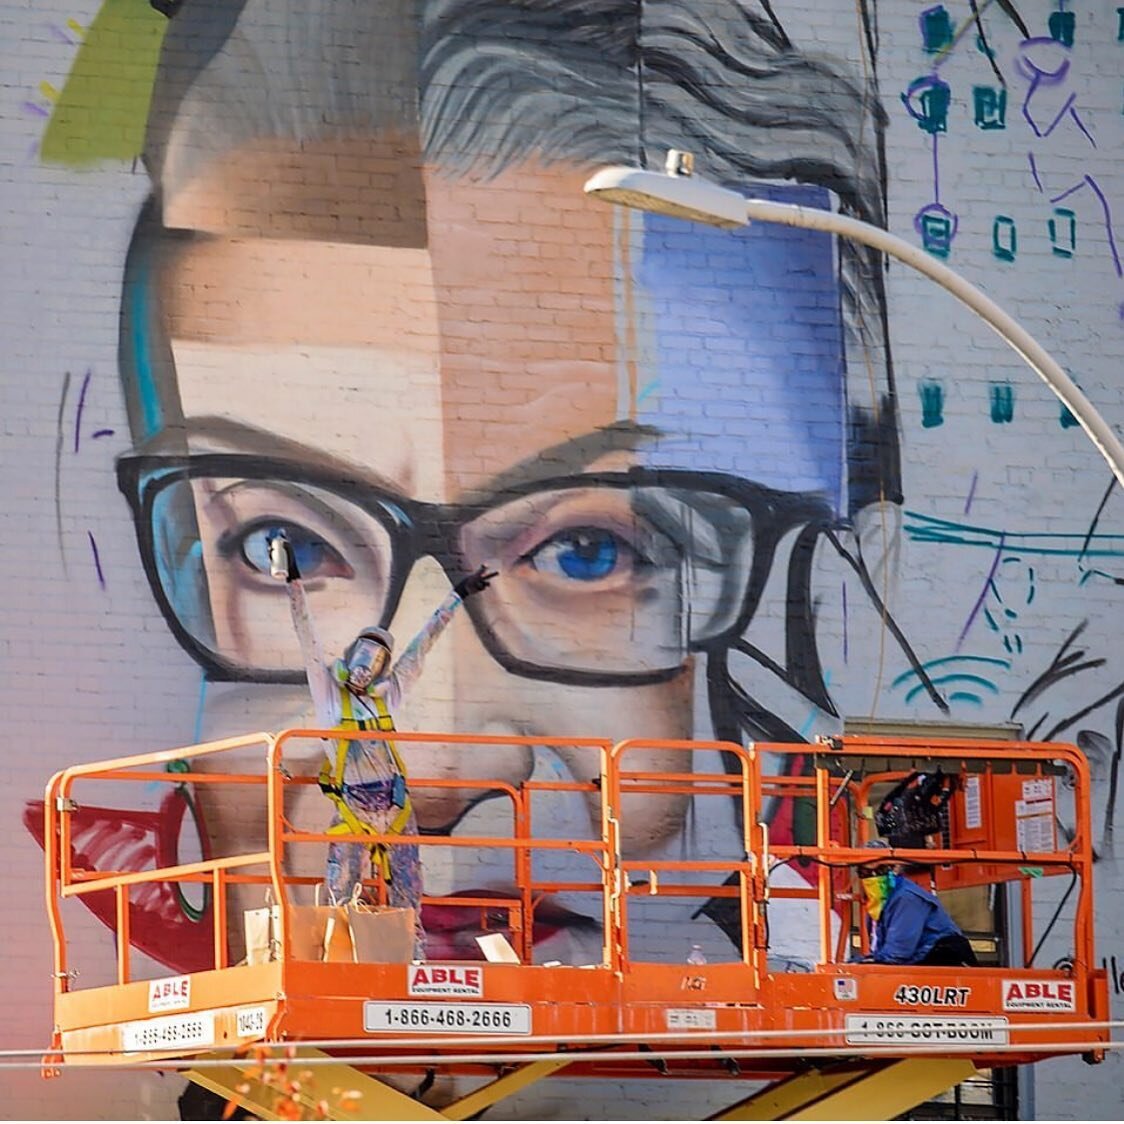 Day 2 on my #nyc  #rbg mural. Thanks to @lisaprojectnyc and @bytegirl24 for help finding the wall and coordinating! @johndomine1 thanks for the flick!! Excited to create a piece to celebrate this bad ass, incredible woman.